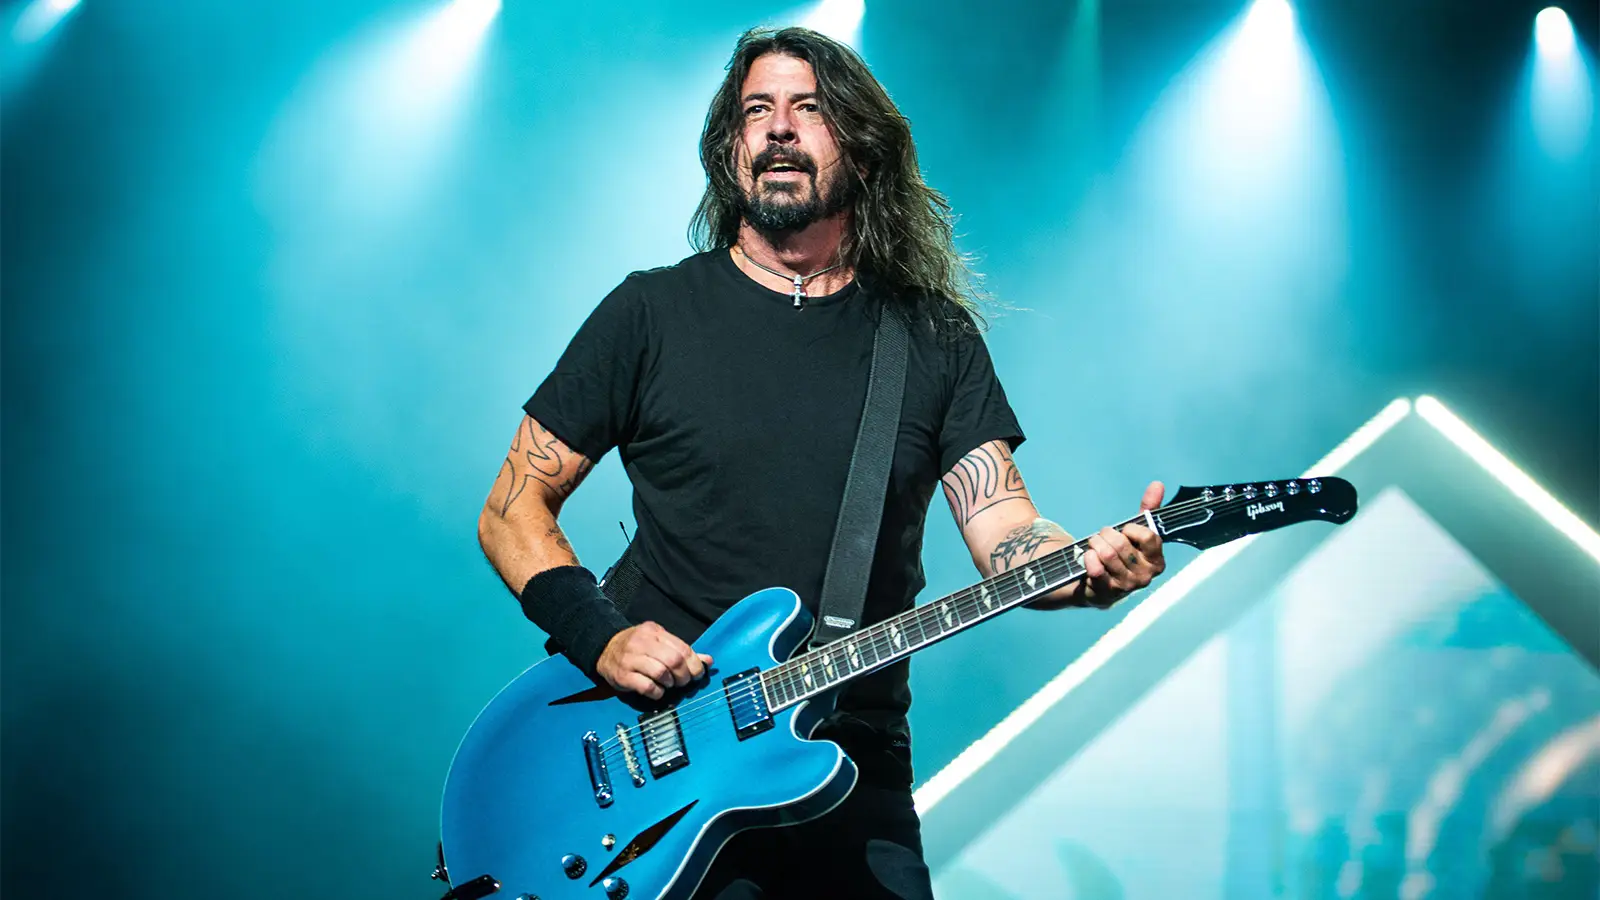 Dave Grohl: Biography, Net Worth, Age, Career & more